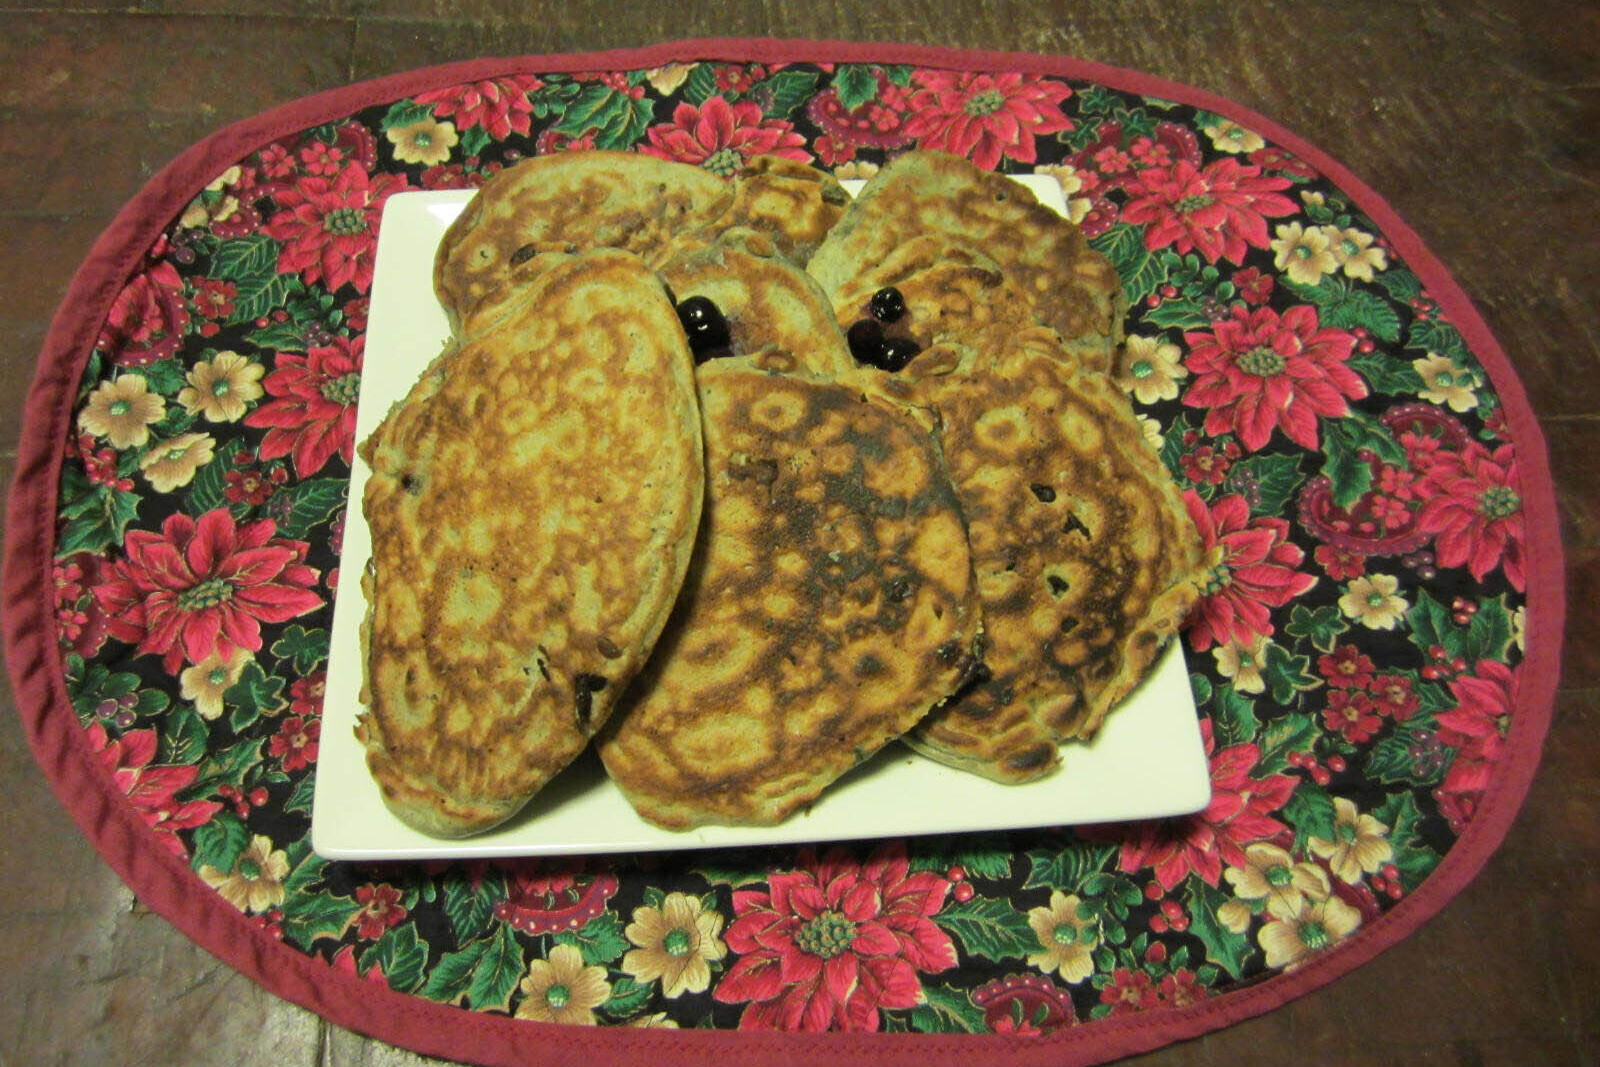 A plate full of buckwheat blueberry pancakes